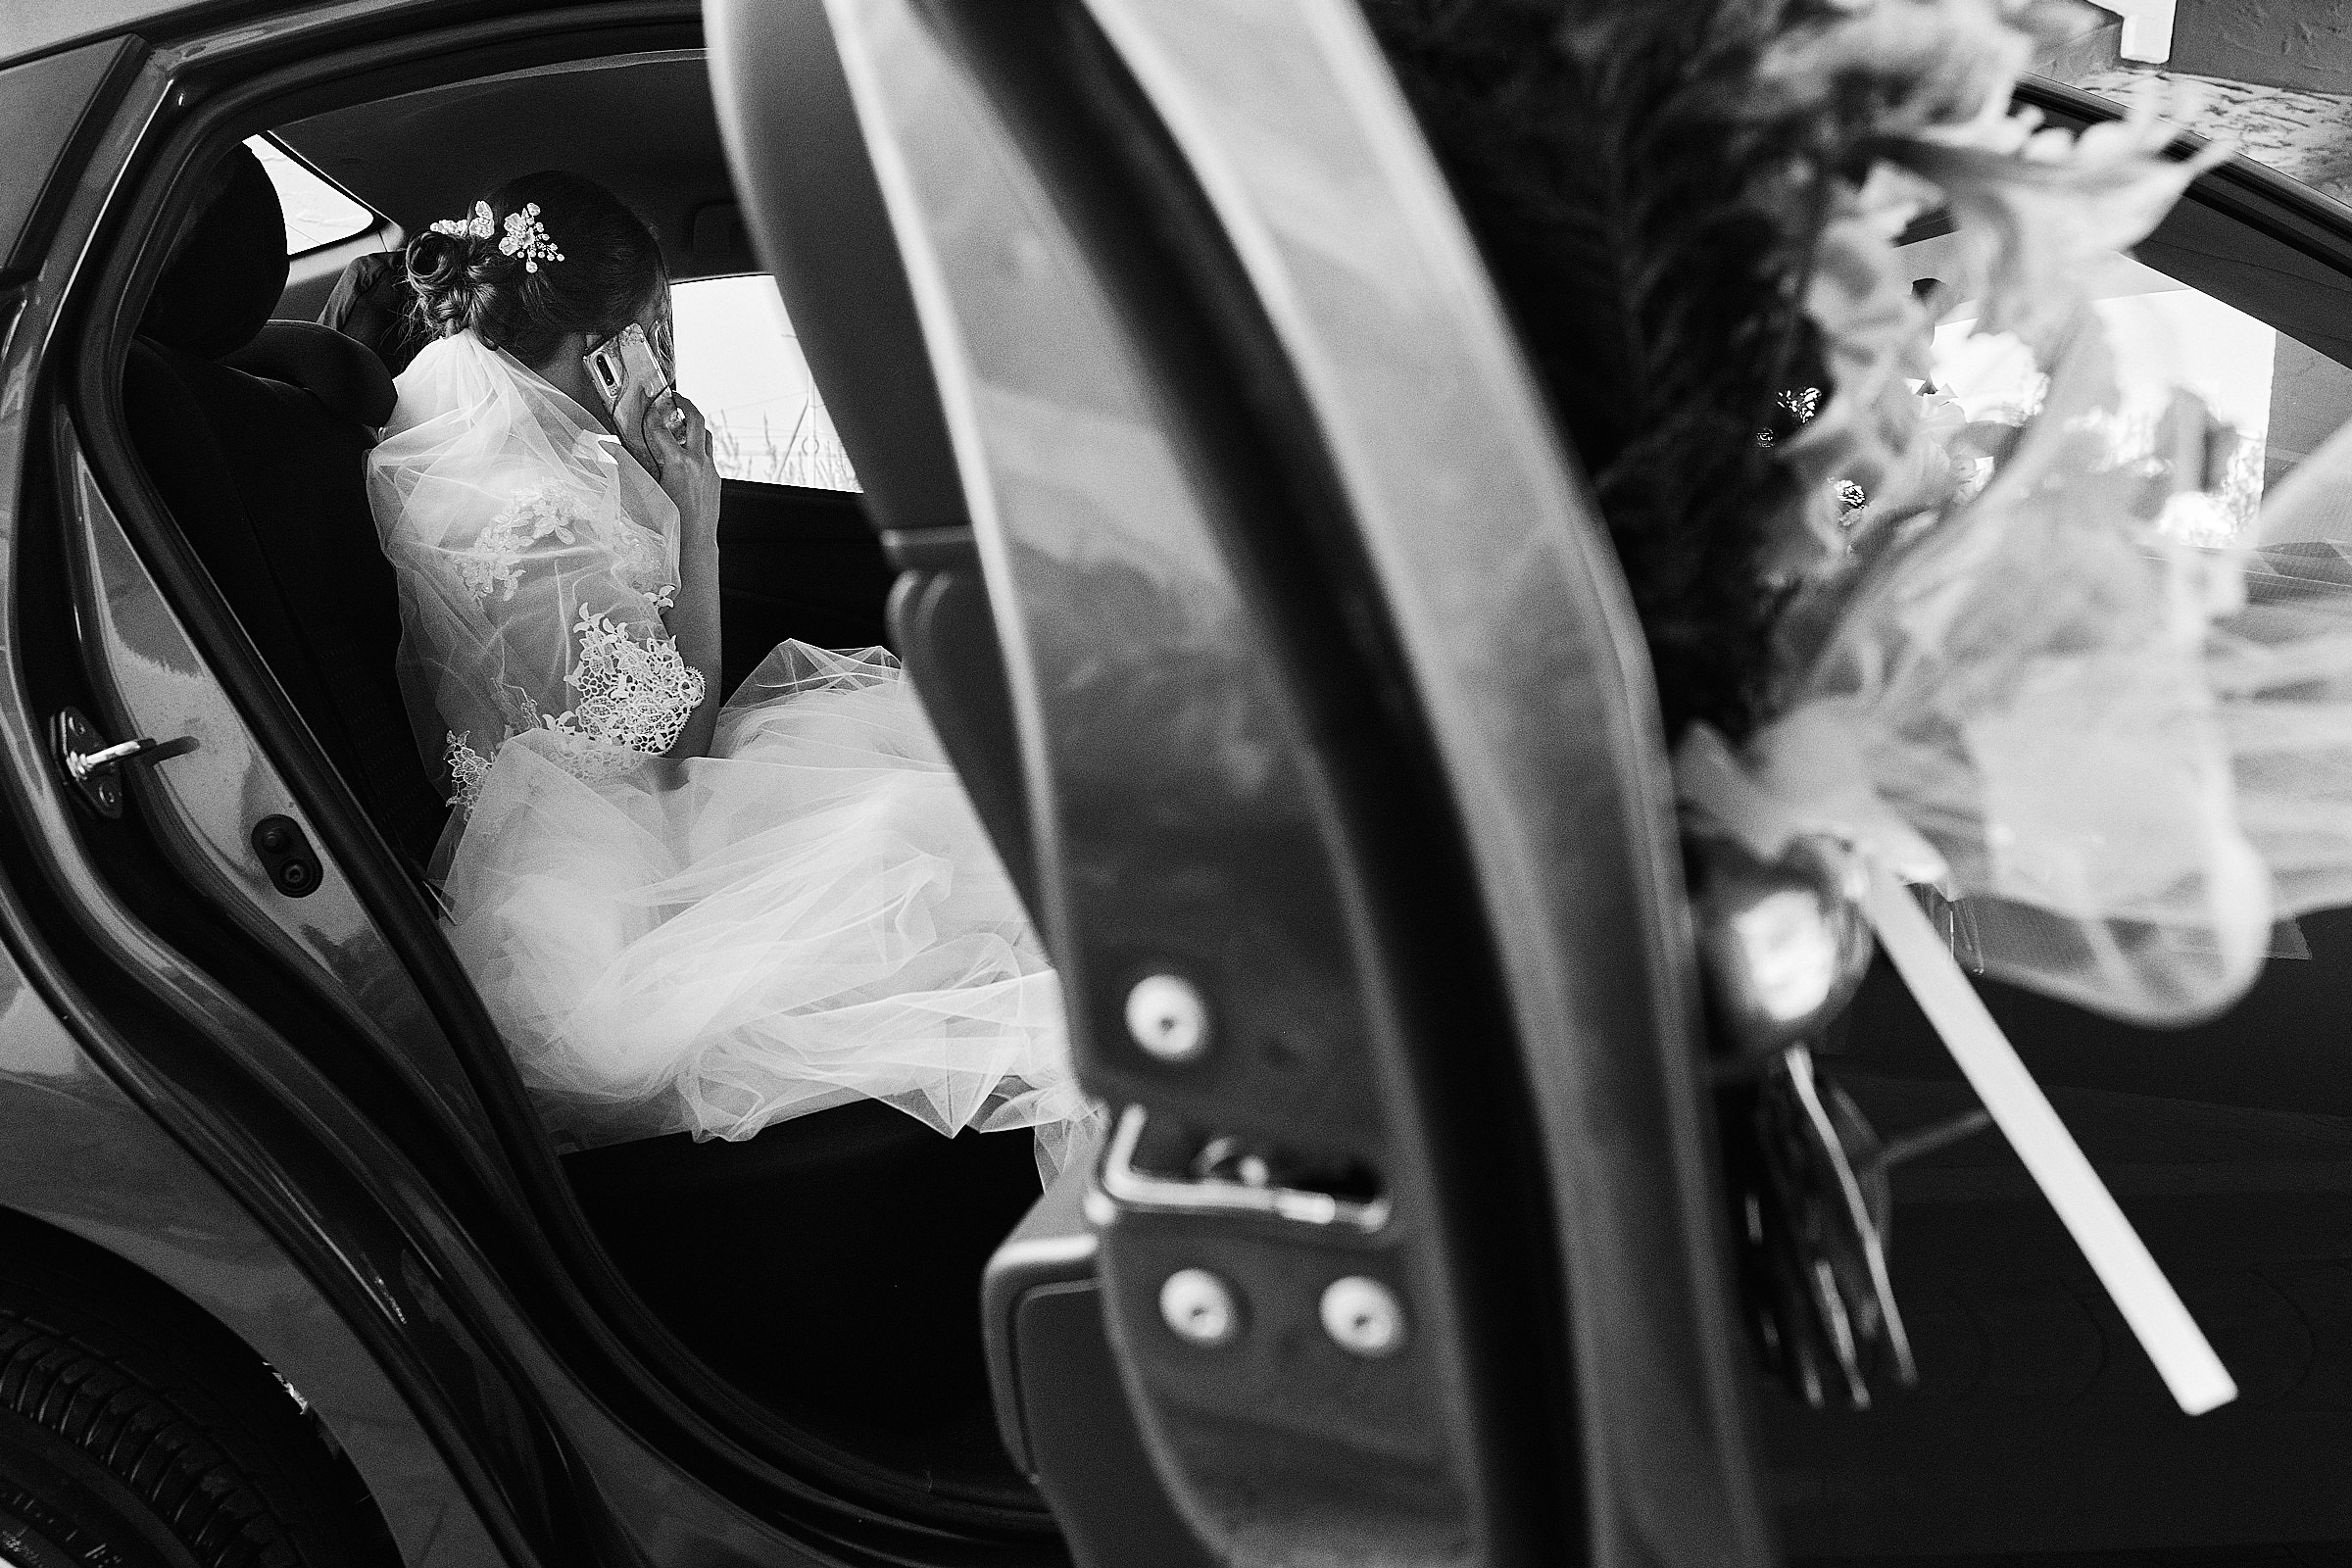 Black And White Image Of Bride On Phone Inside Car